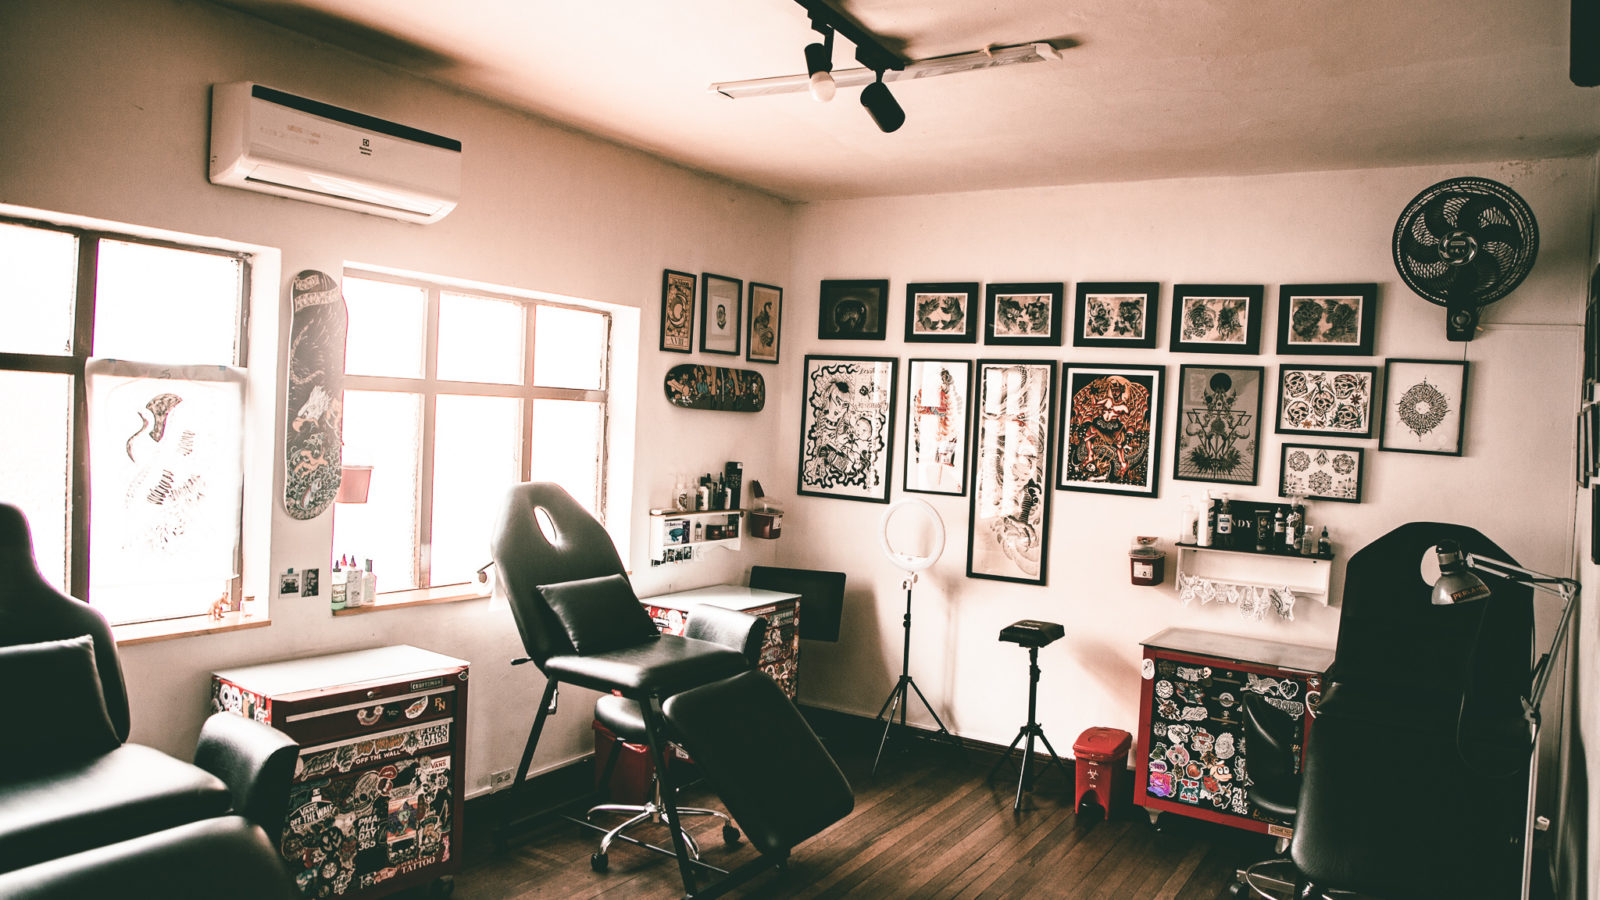 tattoo room with designs on the walls